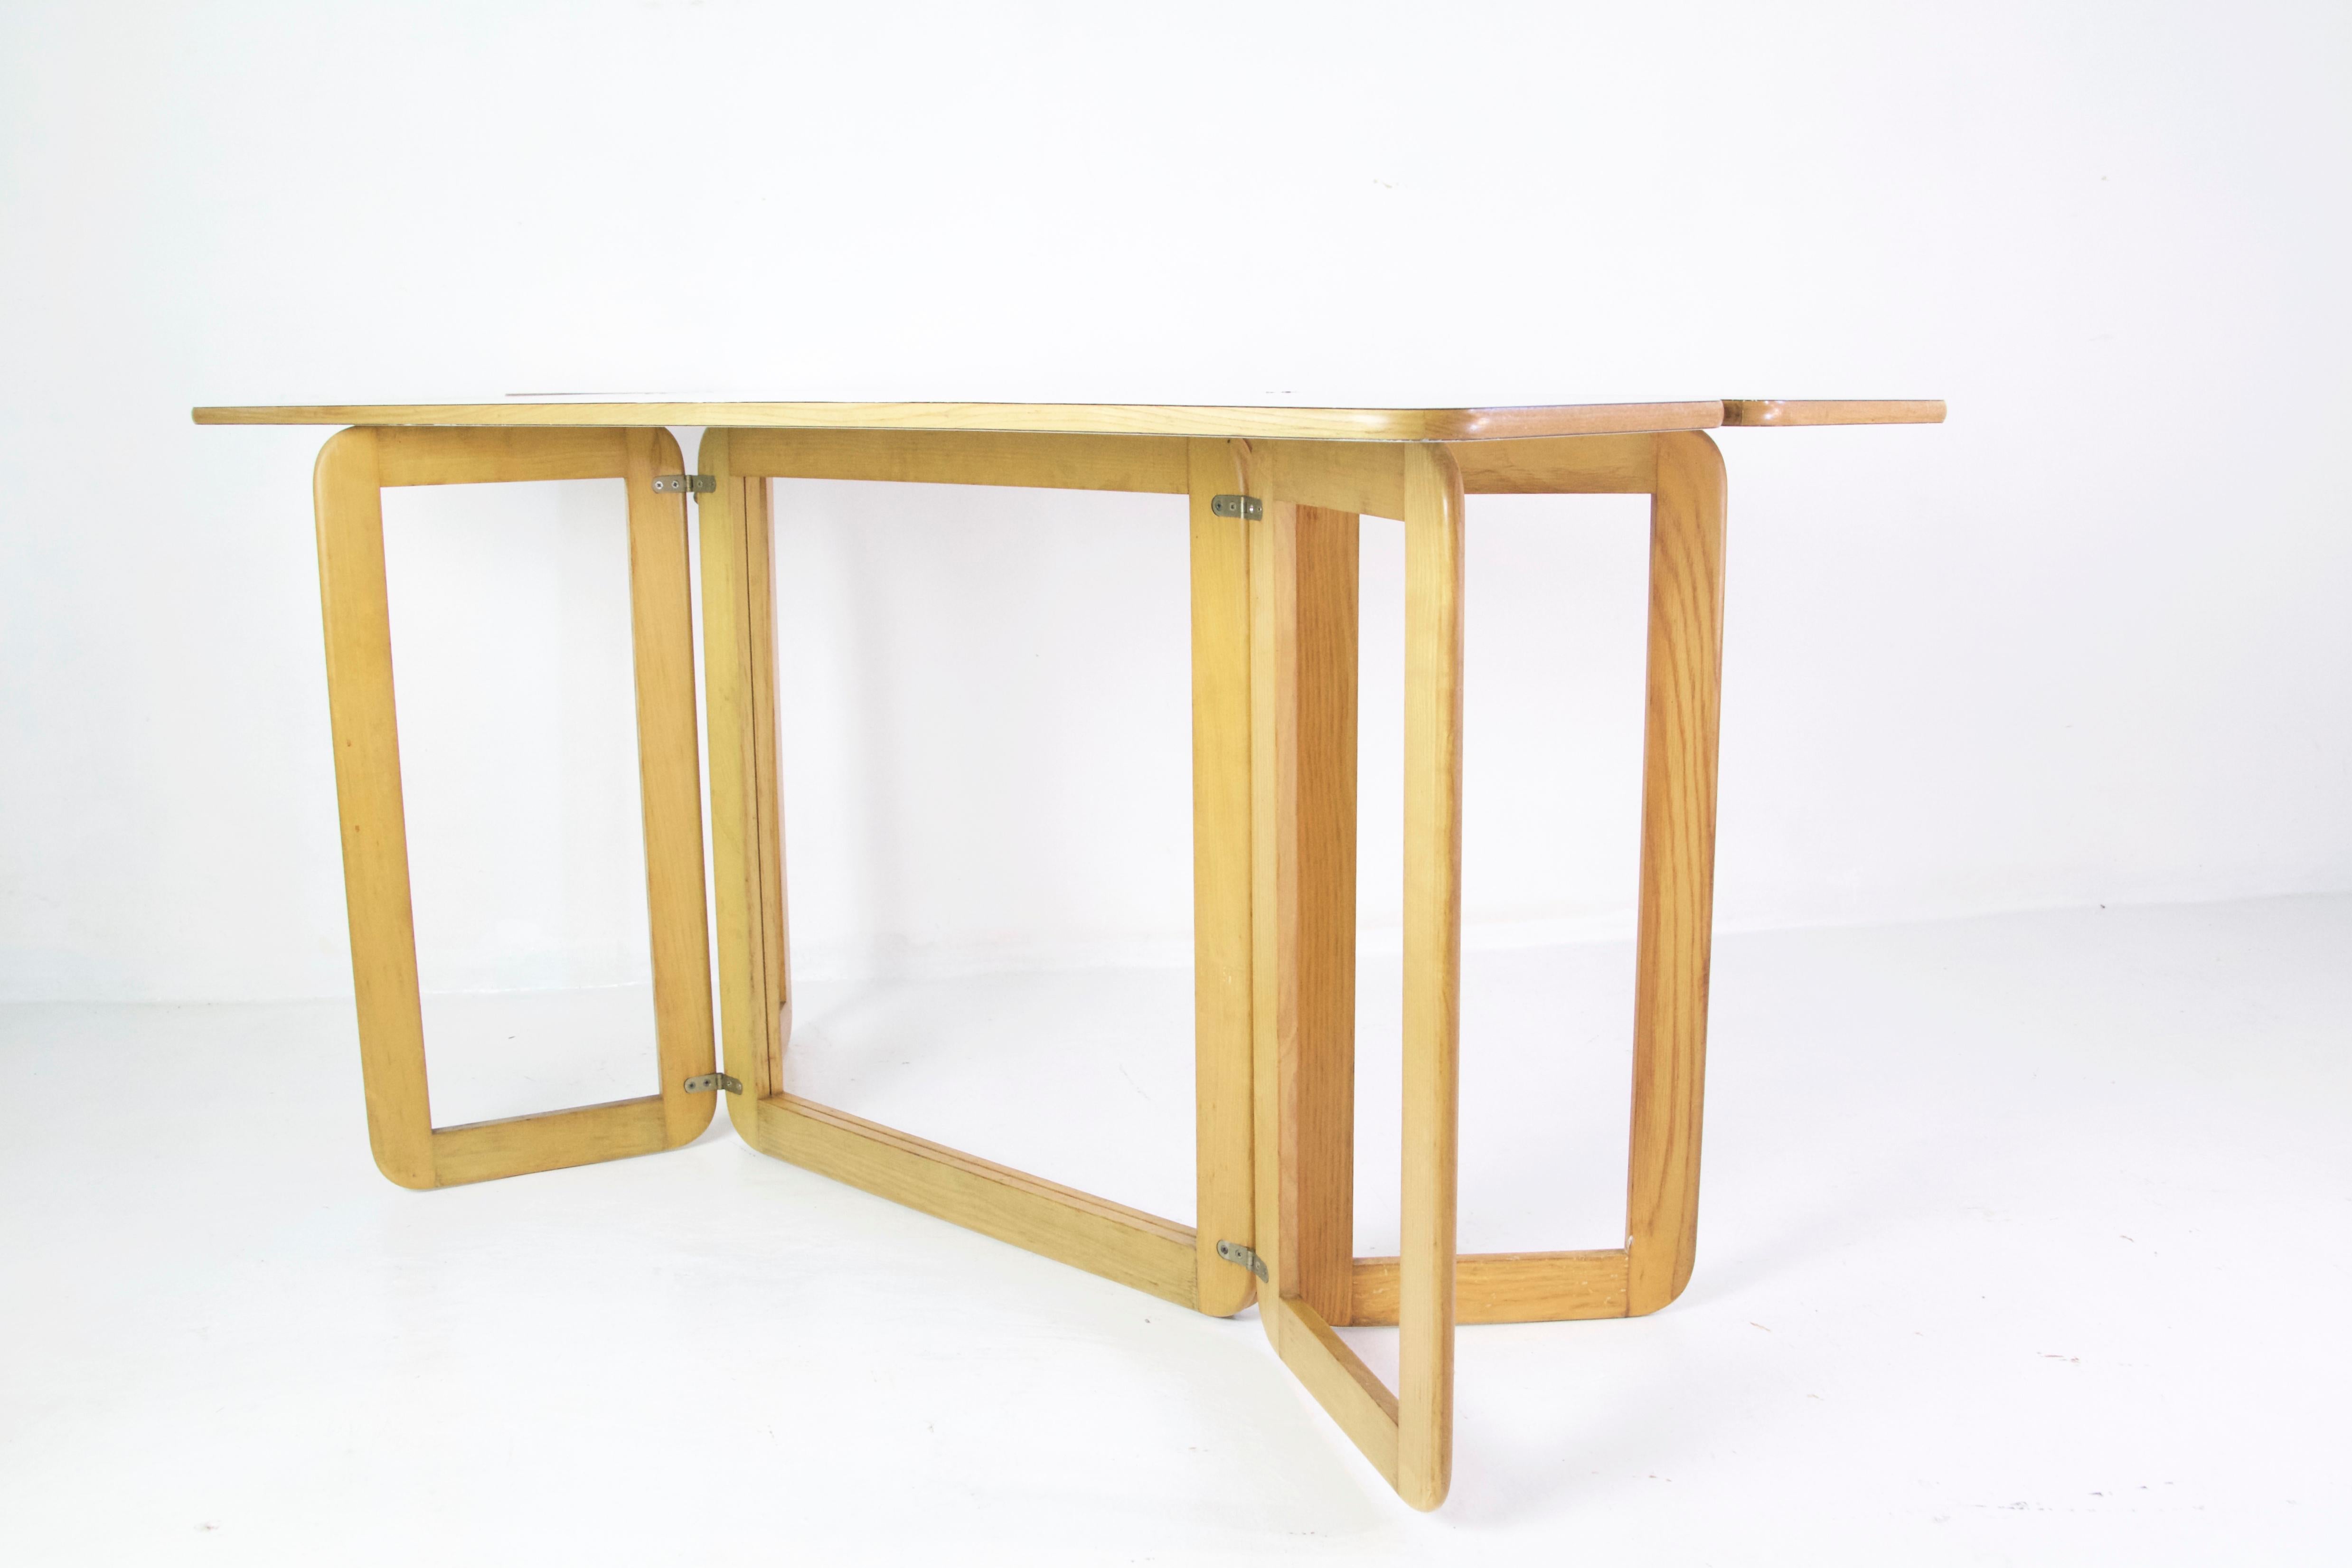 Table by designer Giovanni Offredi and produced by MC Selvini, 1970s. Works excellent as a freestanding table, desk or against a wall and it can be used in its full width or as a console with the top folded. The construction is fully foldable.